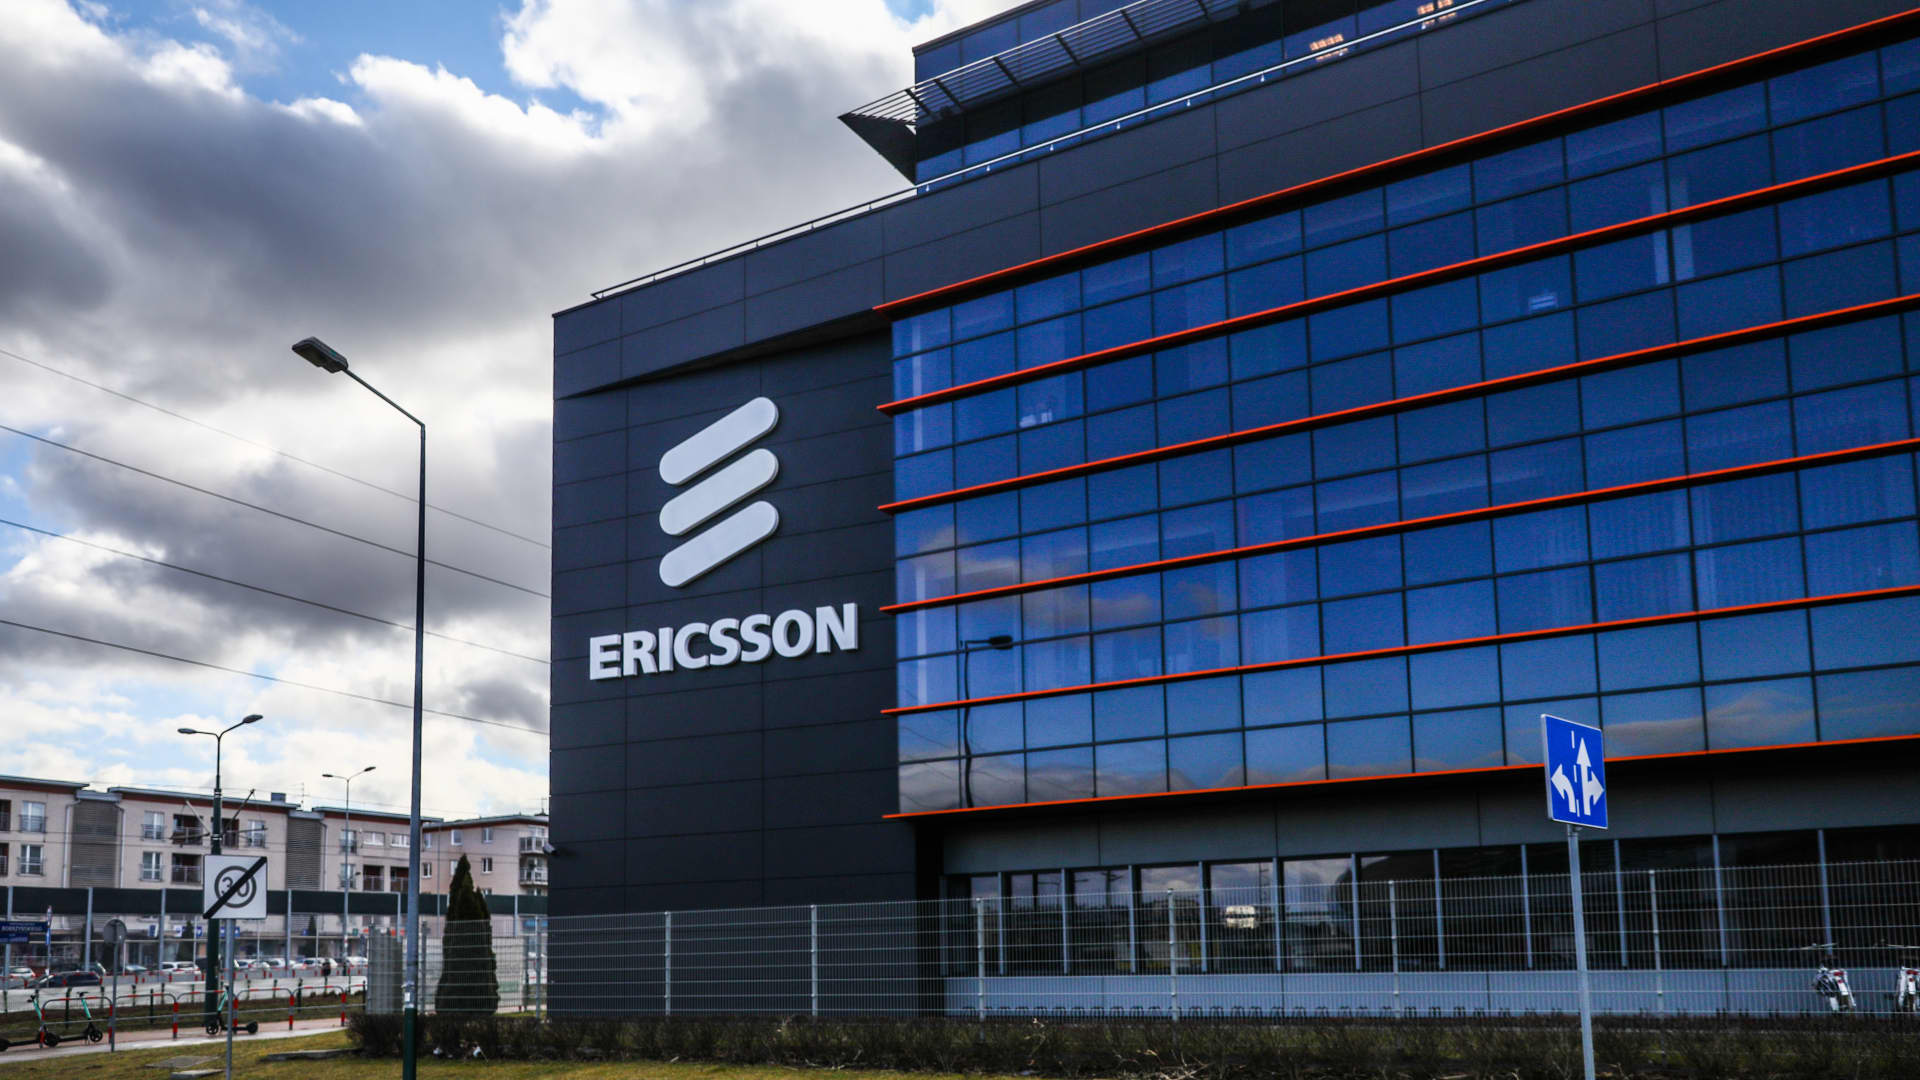 Ericsson pleads guilty in U.S. to federal bribery violations, agrees to pay $206 million penalty